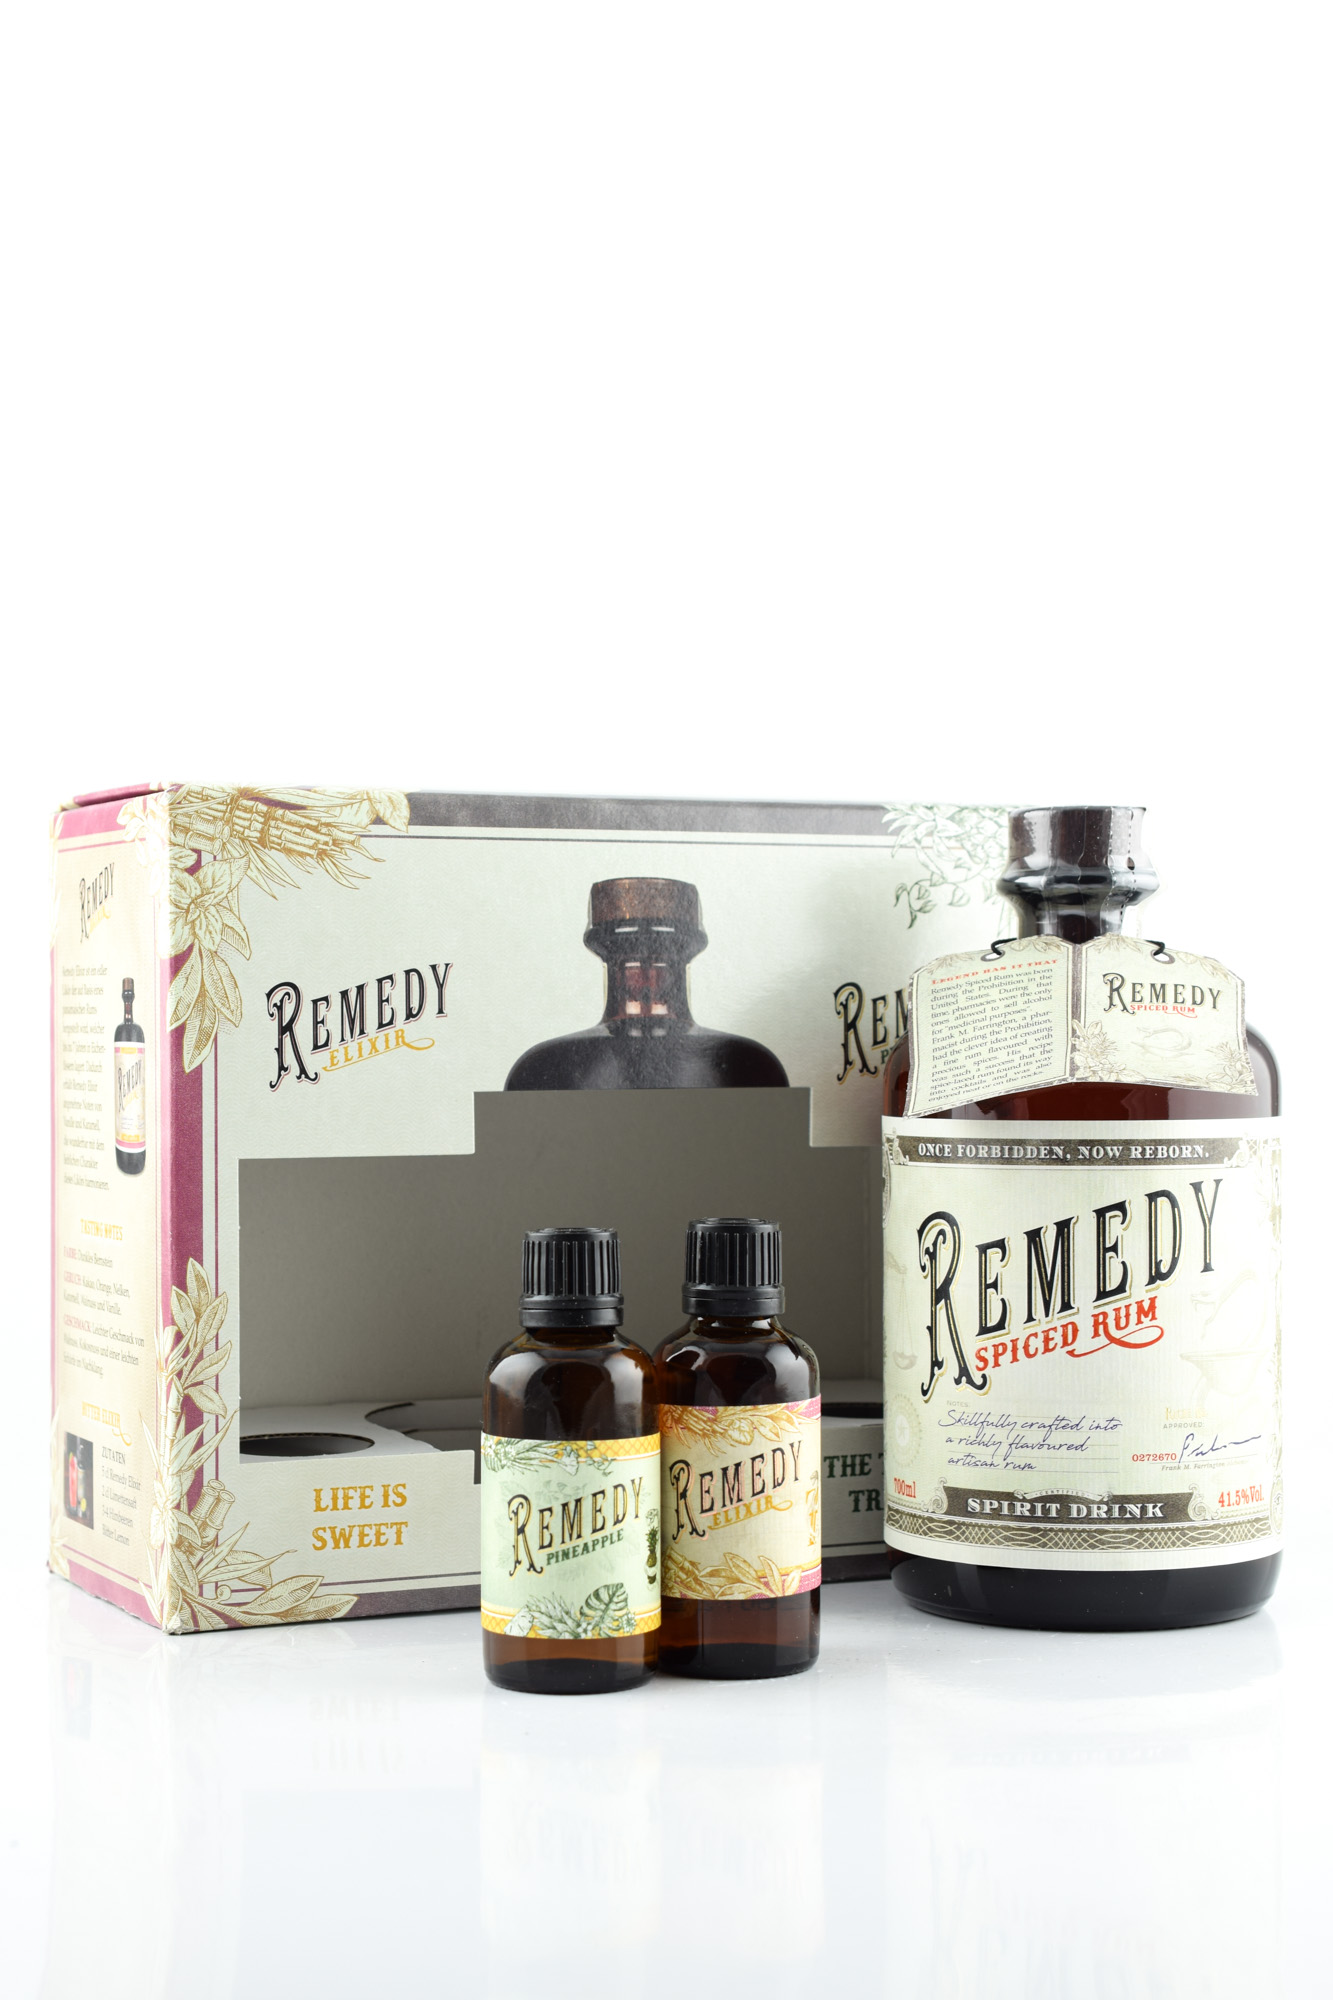 now! Spiced | >> Malts Home Malts of Rum Home explore at of Remedy